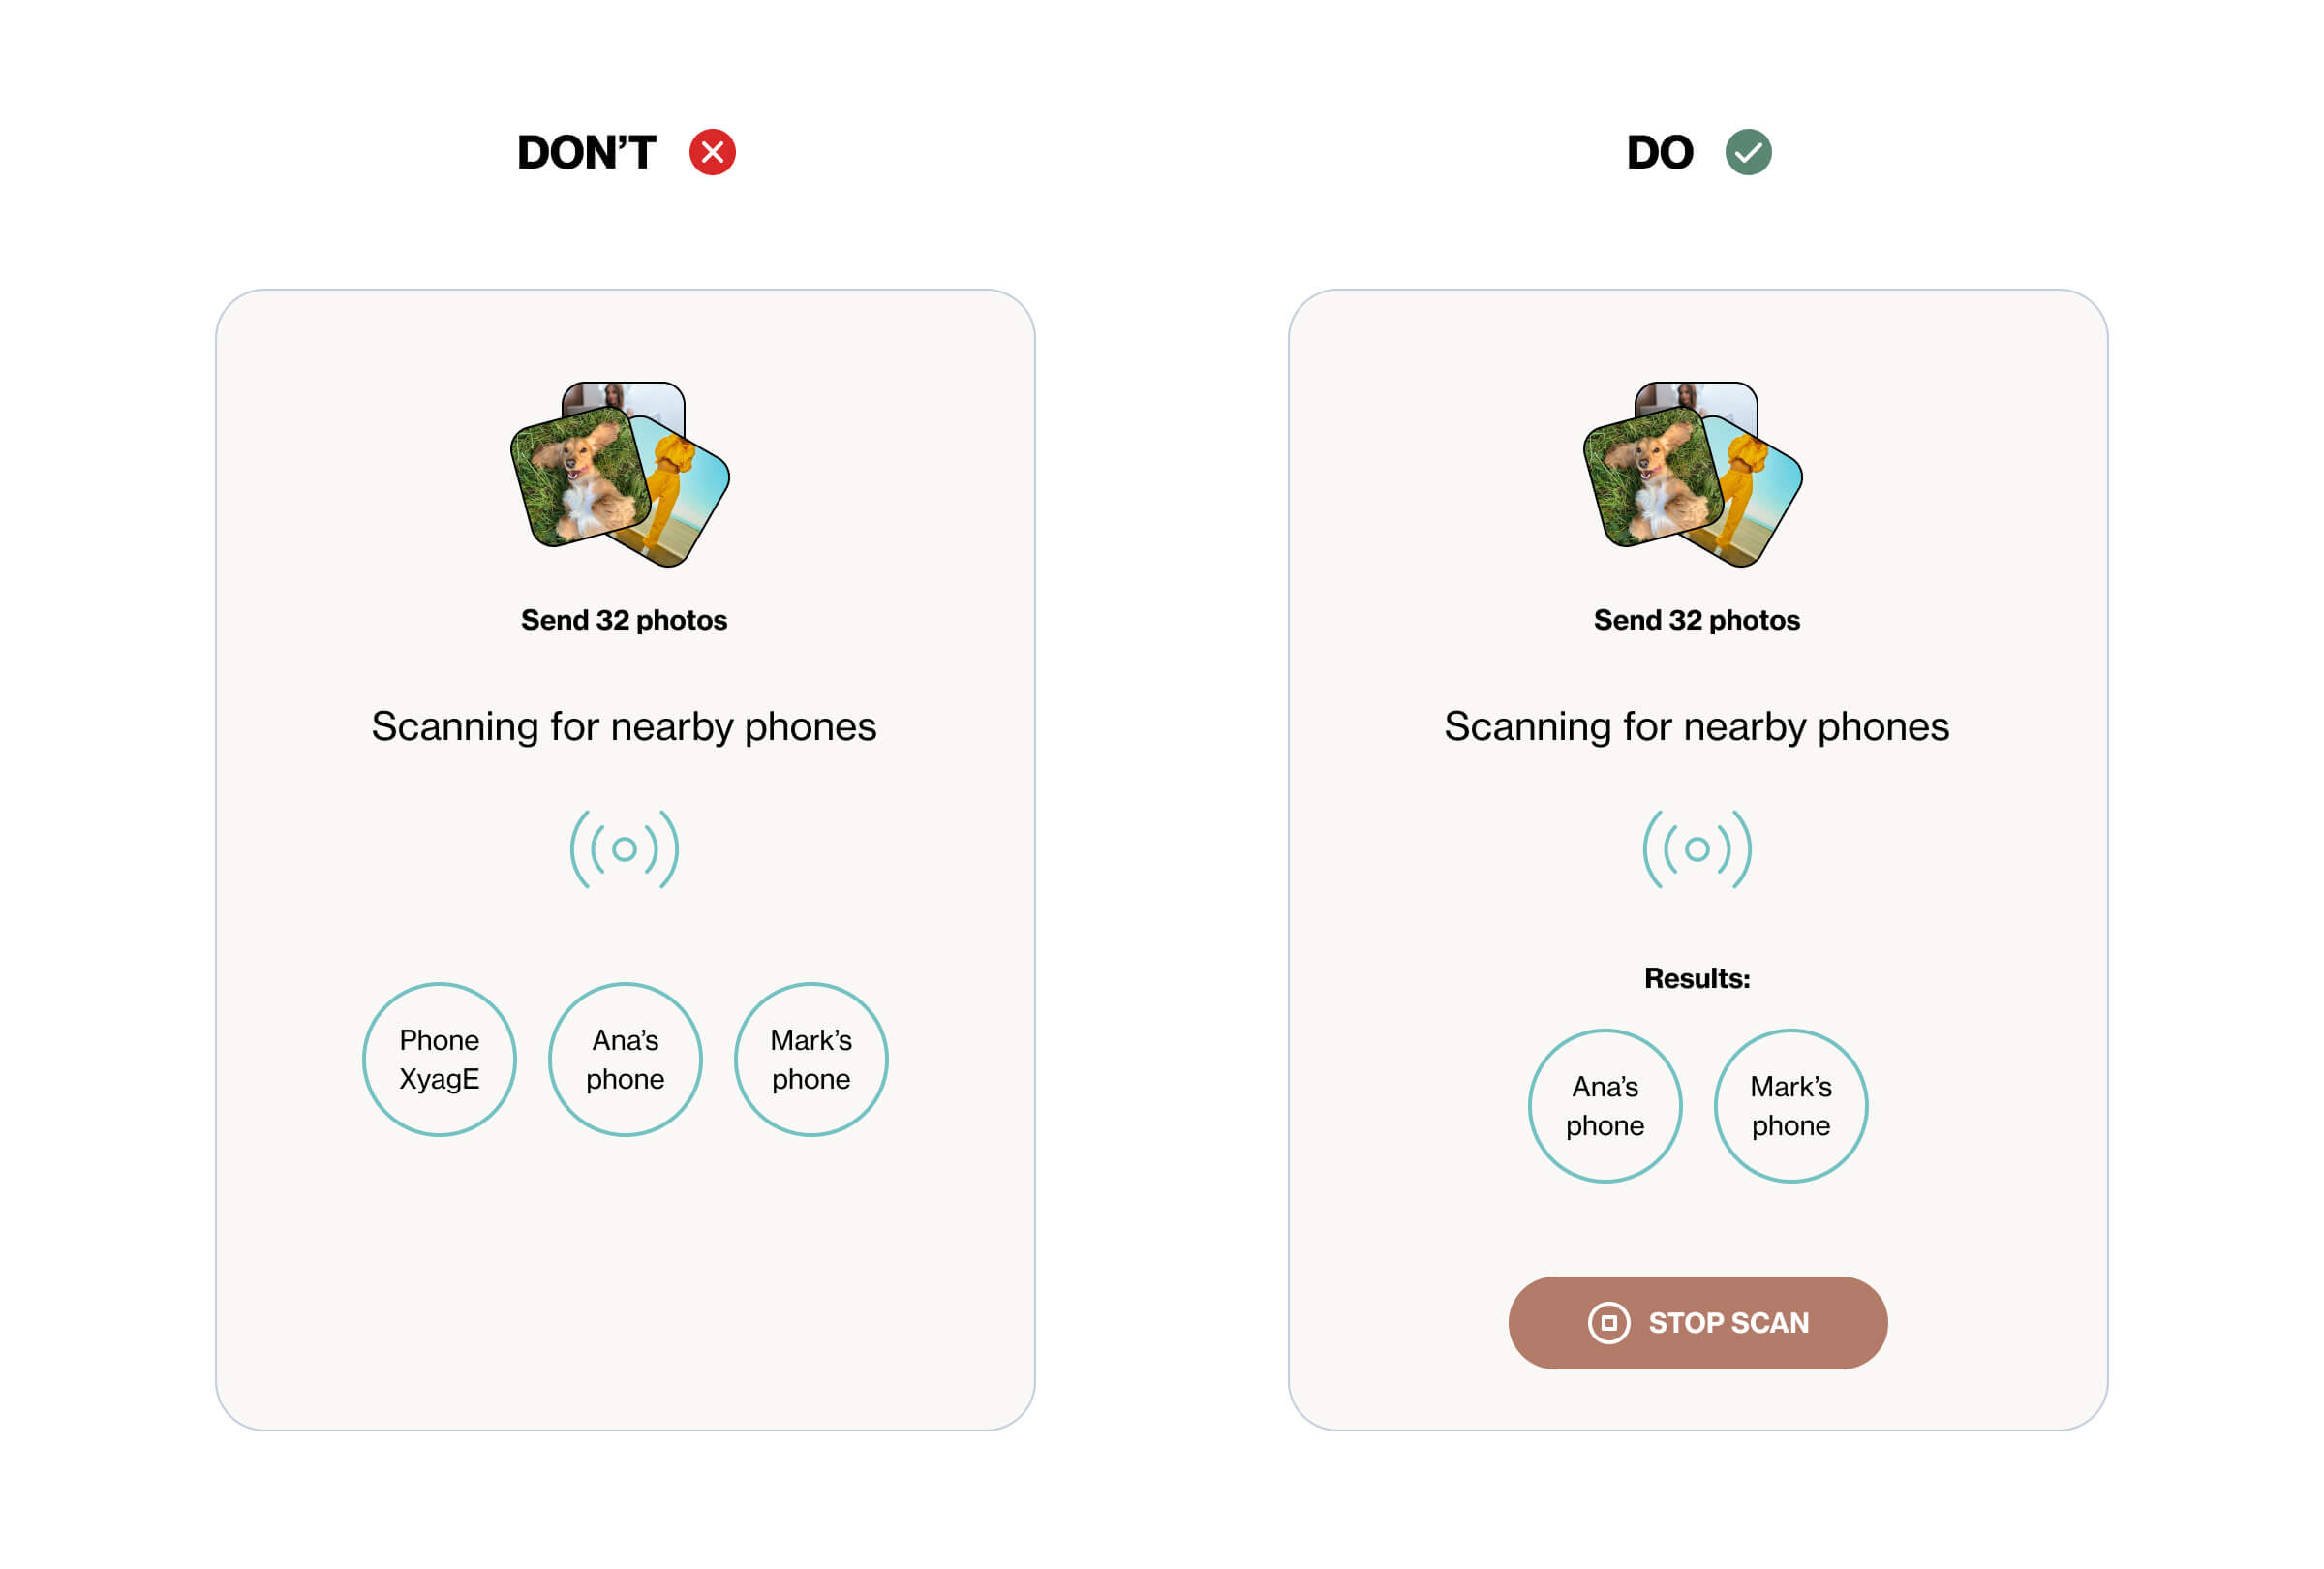 The image shows two mobile connectivity displays, scanning for nearby phones in order to transfer photos. The first, labeled ‘Don’t’, shows a scan in progress with three nearby phones found: Ana’s phone, Mark’s phone, and Phone XyagE. The second, labeled ‘Do’, shows a button labeled ‘Stop Scan’ underneath two nearby phones found: Ana’s phone and Mark’s phone. In the second example, the user has been given control over stopping the scan for nearby phones.